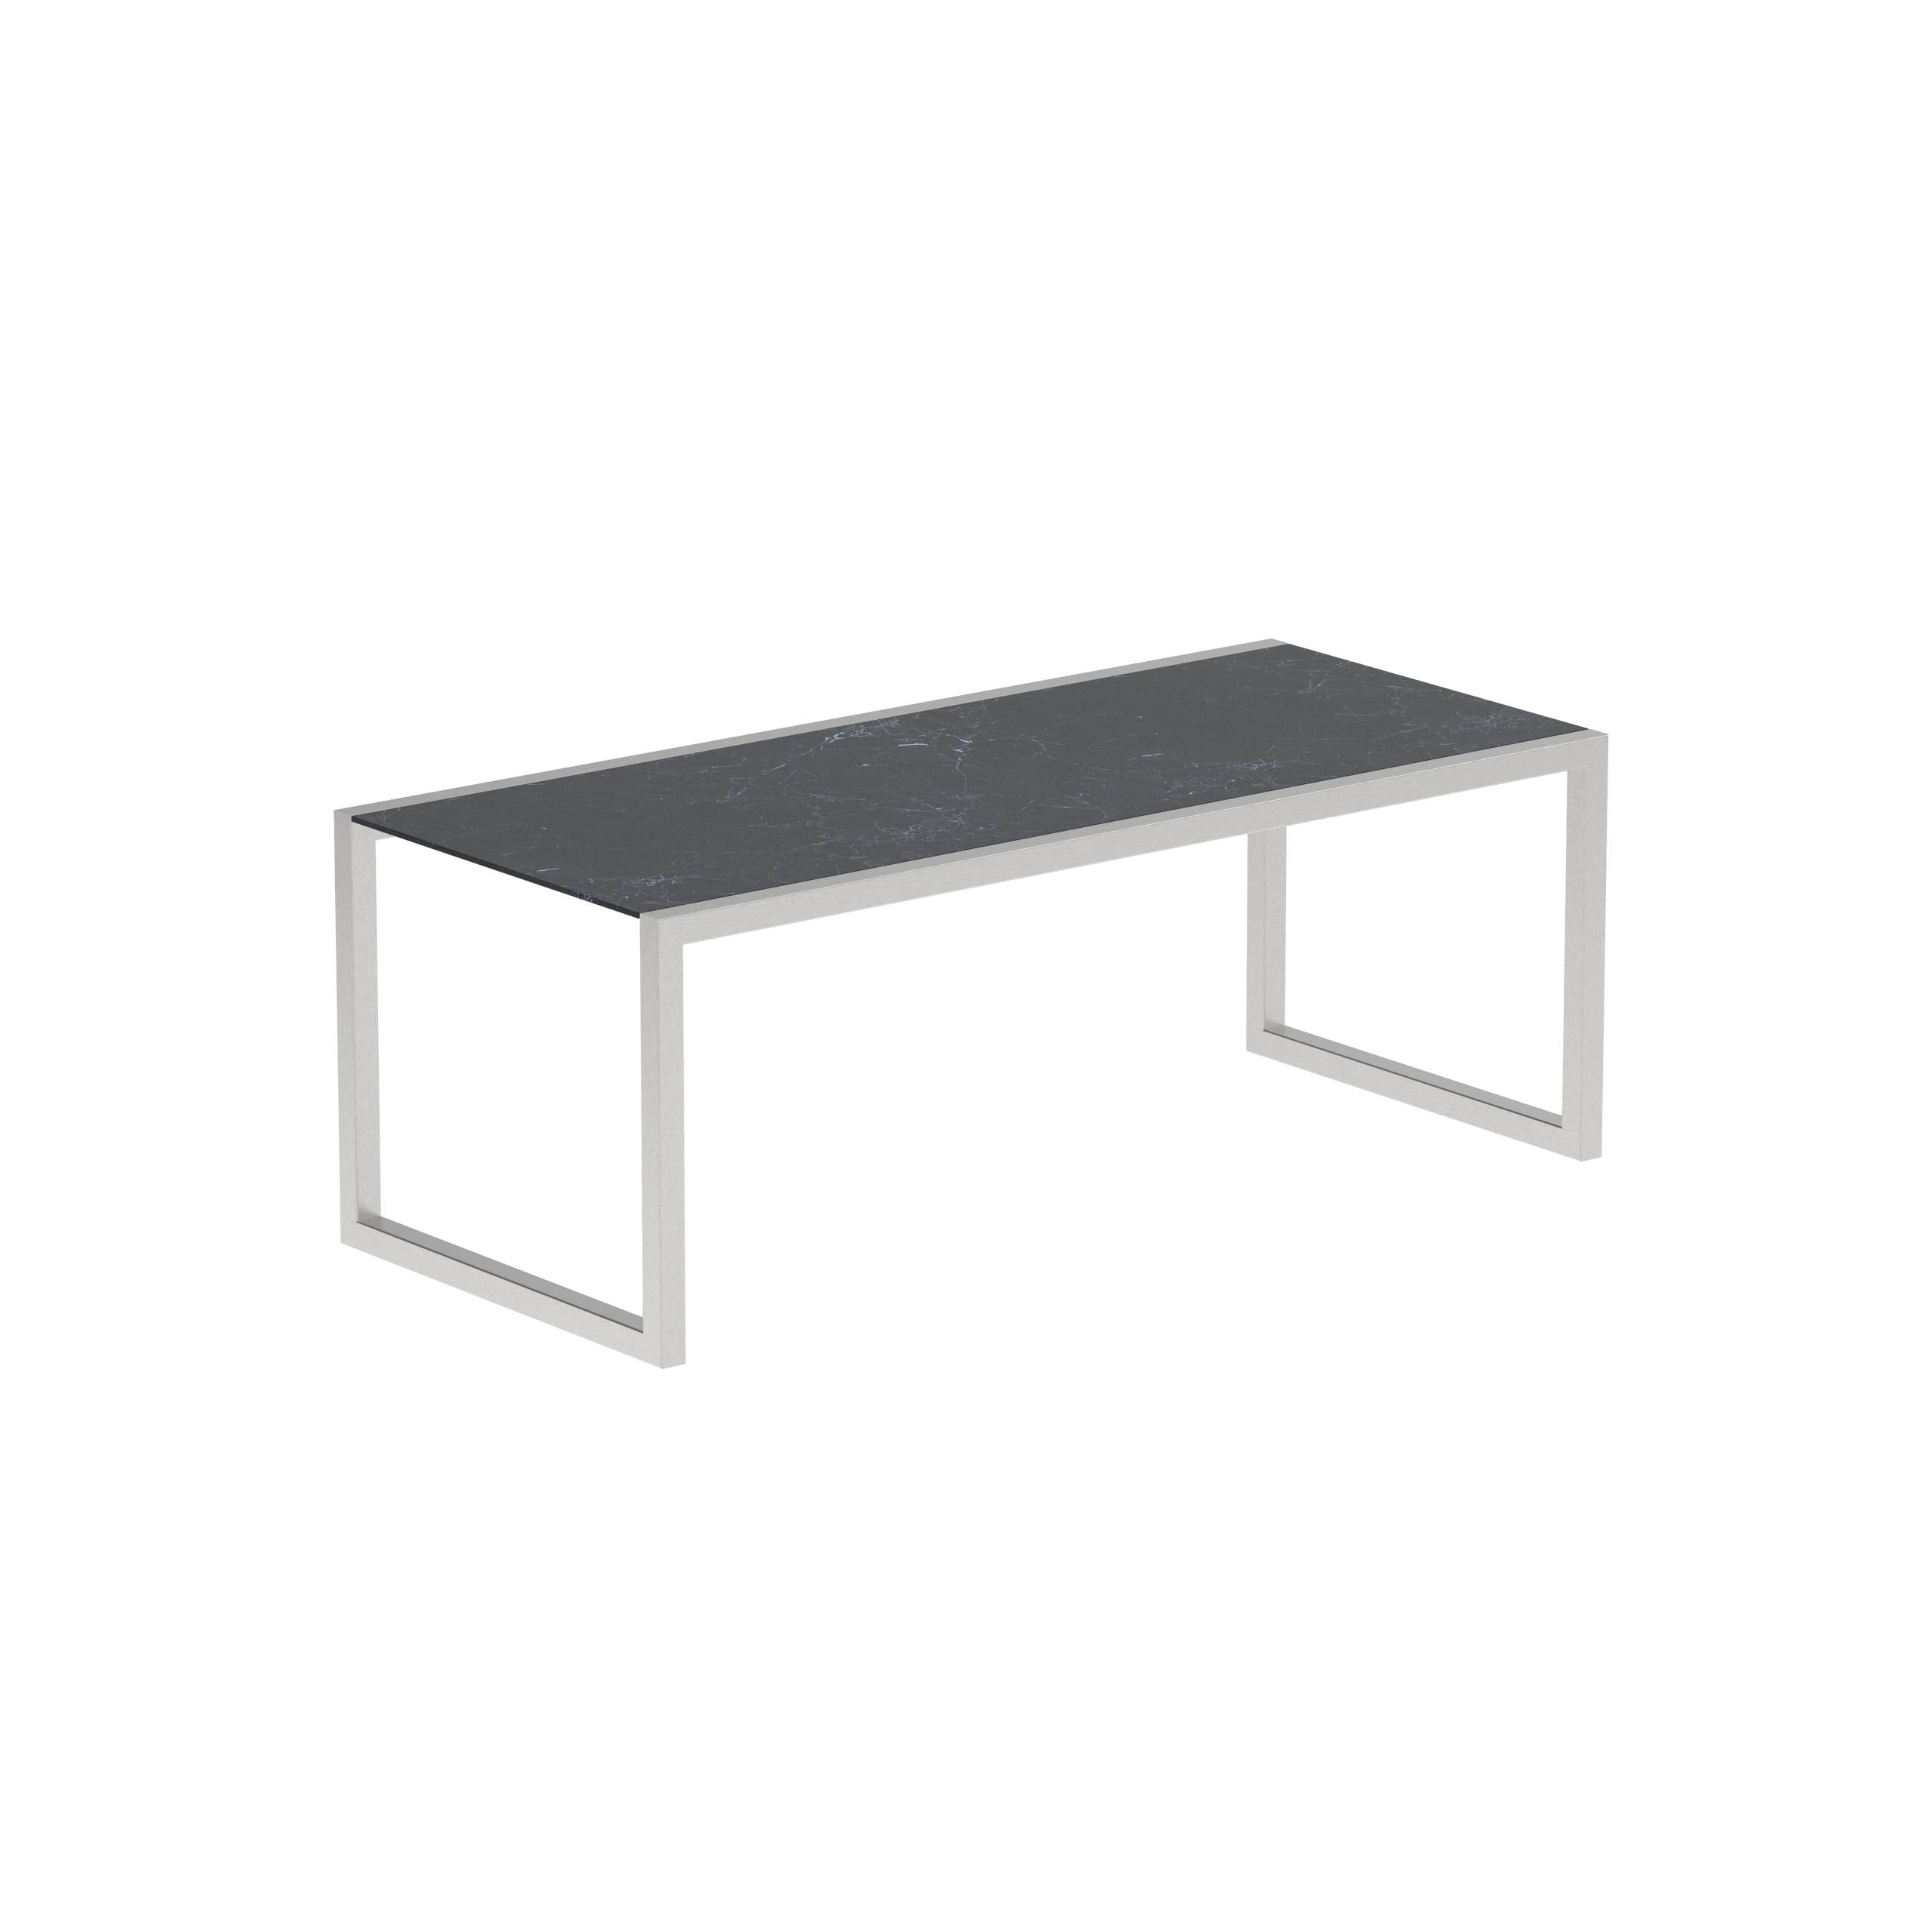 Ninix Table 200x90cm With Stainless Steel And Ceramic Nero Marquina